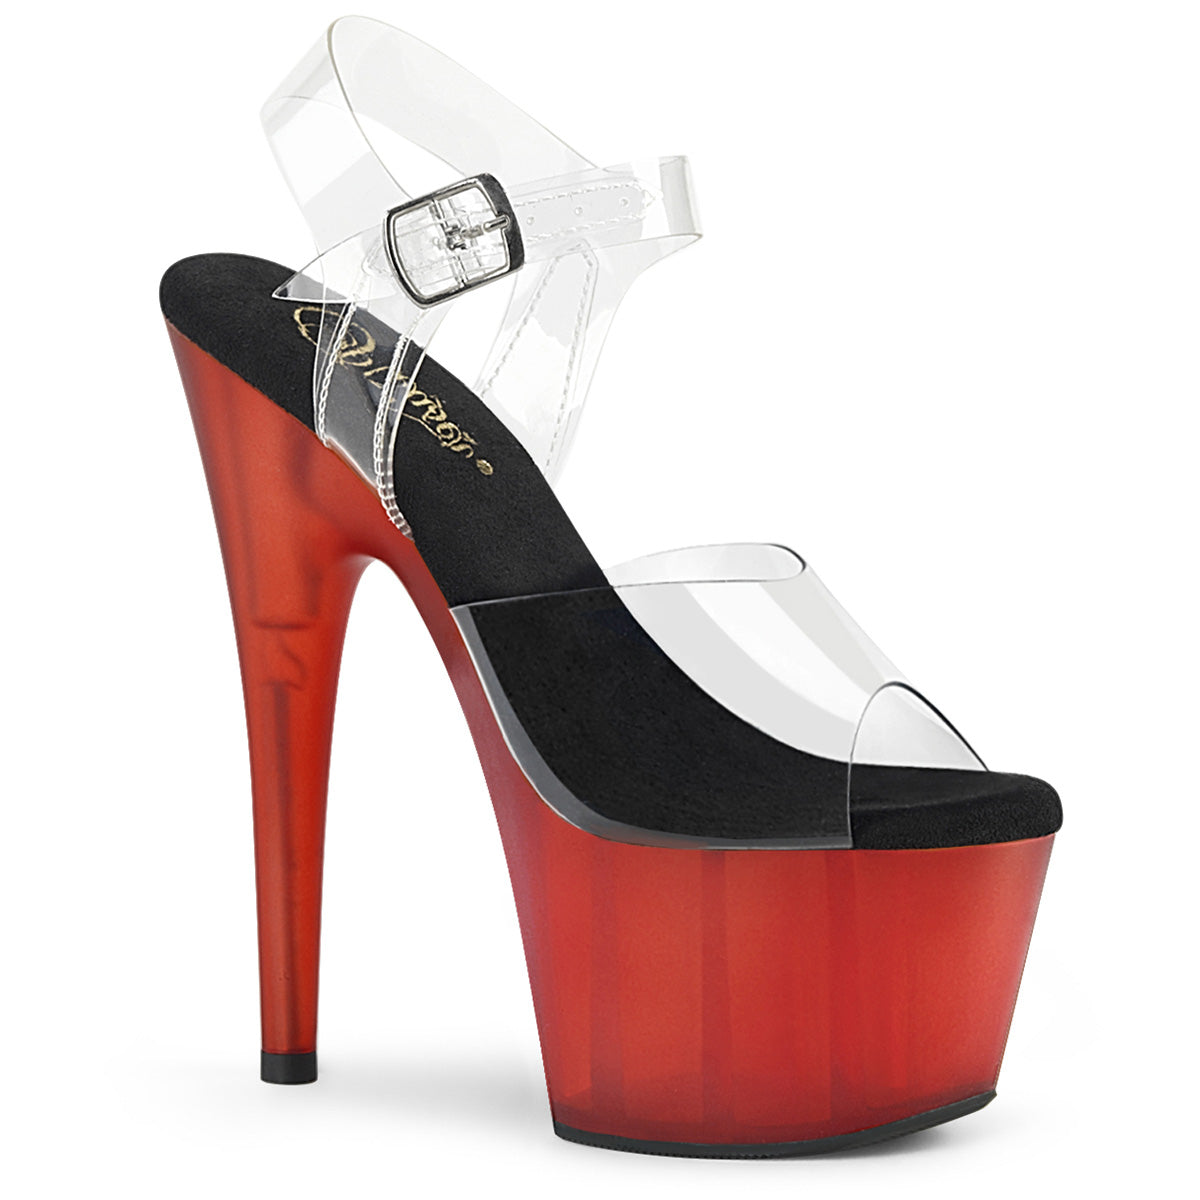 ADORE-708T 7" Heel Clear and Red Frosted Pole Dancing Shoes